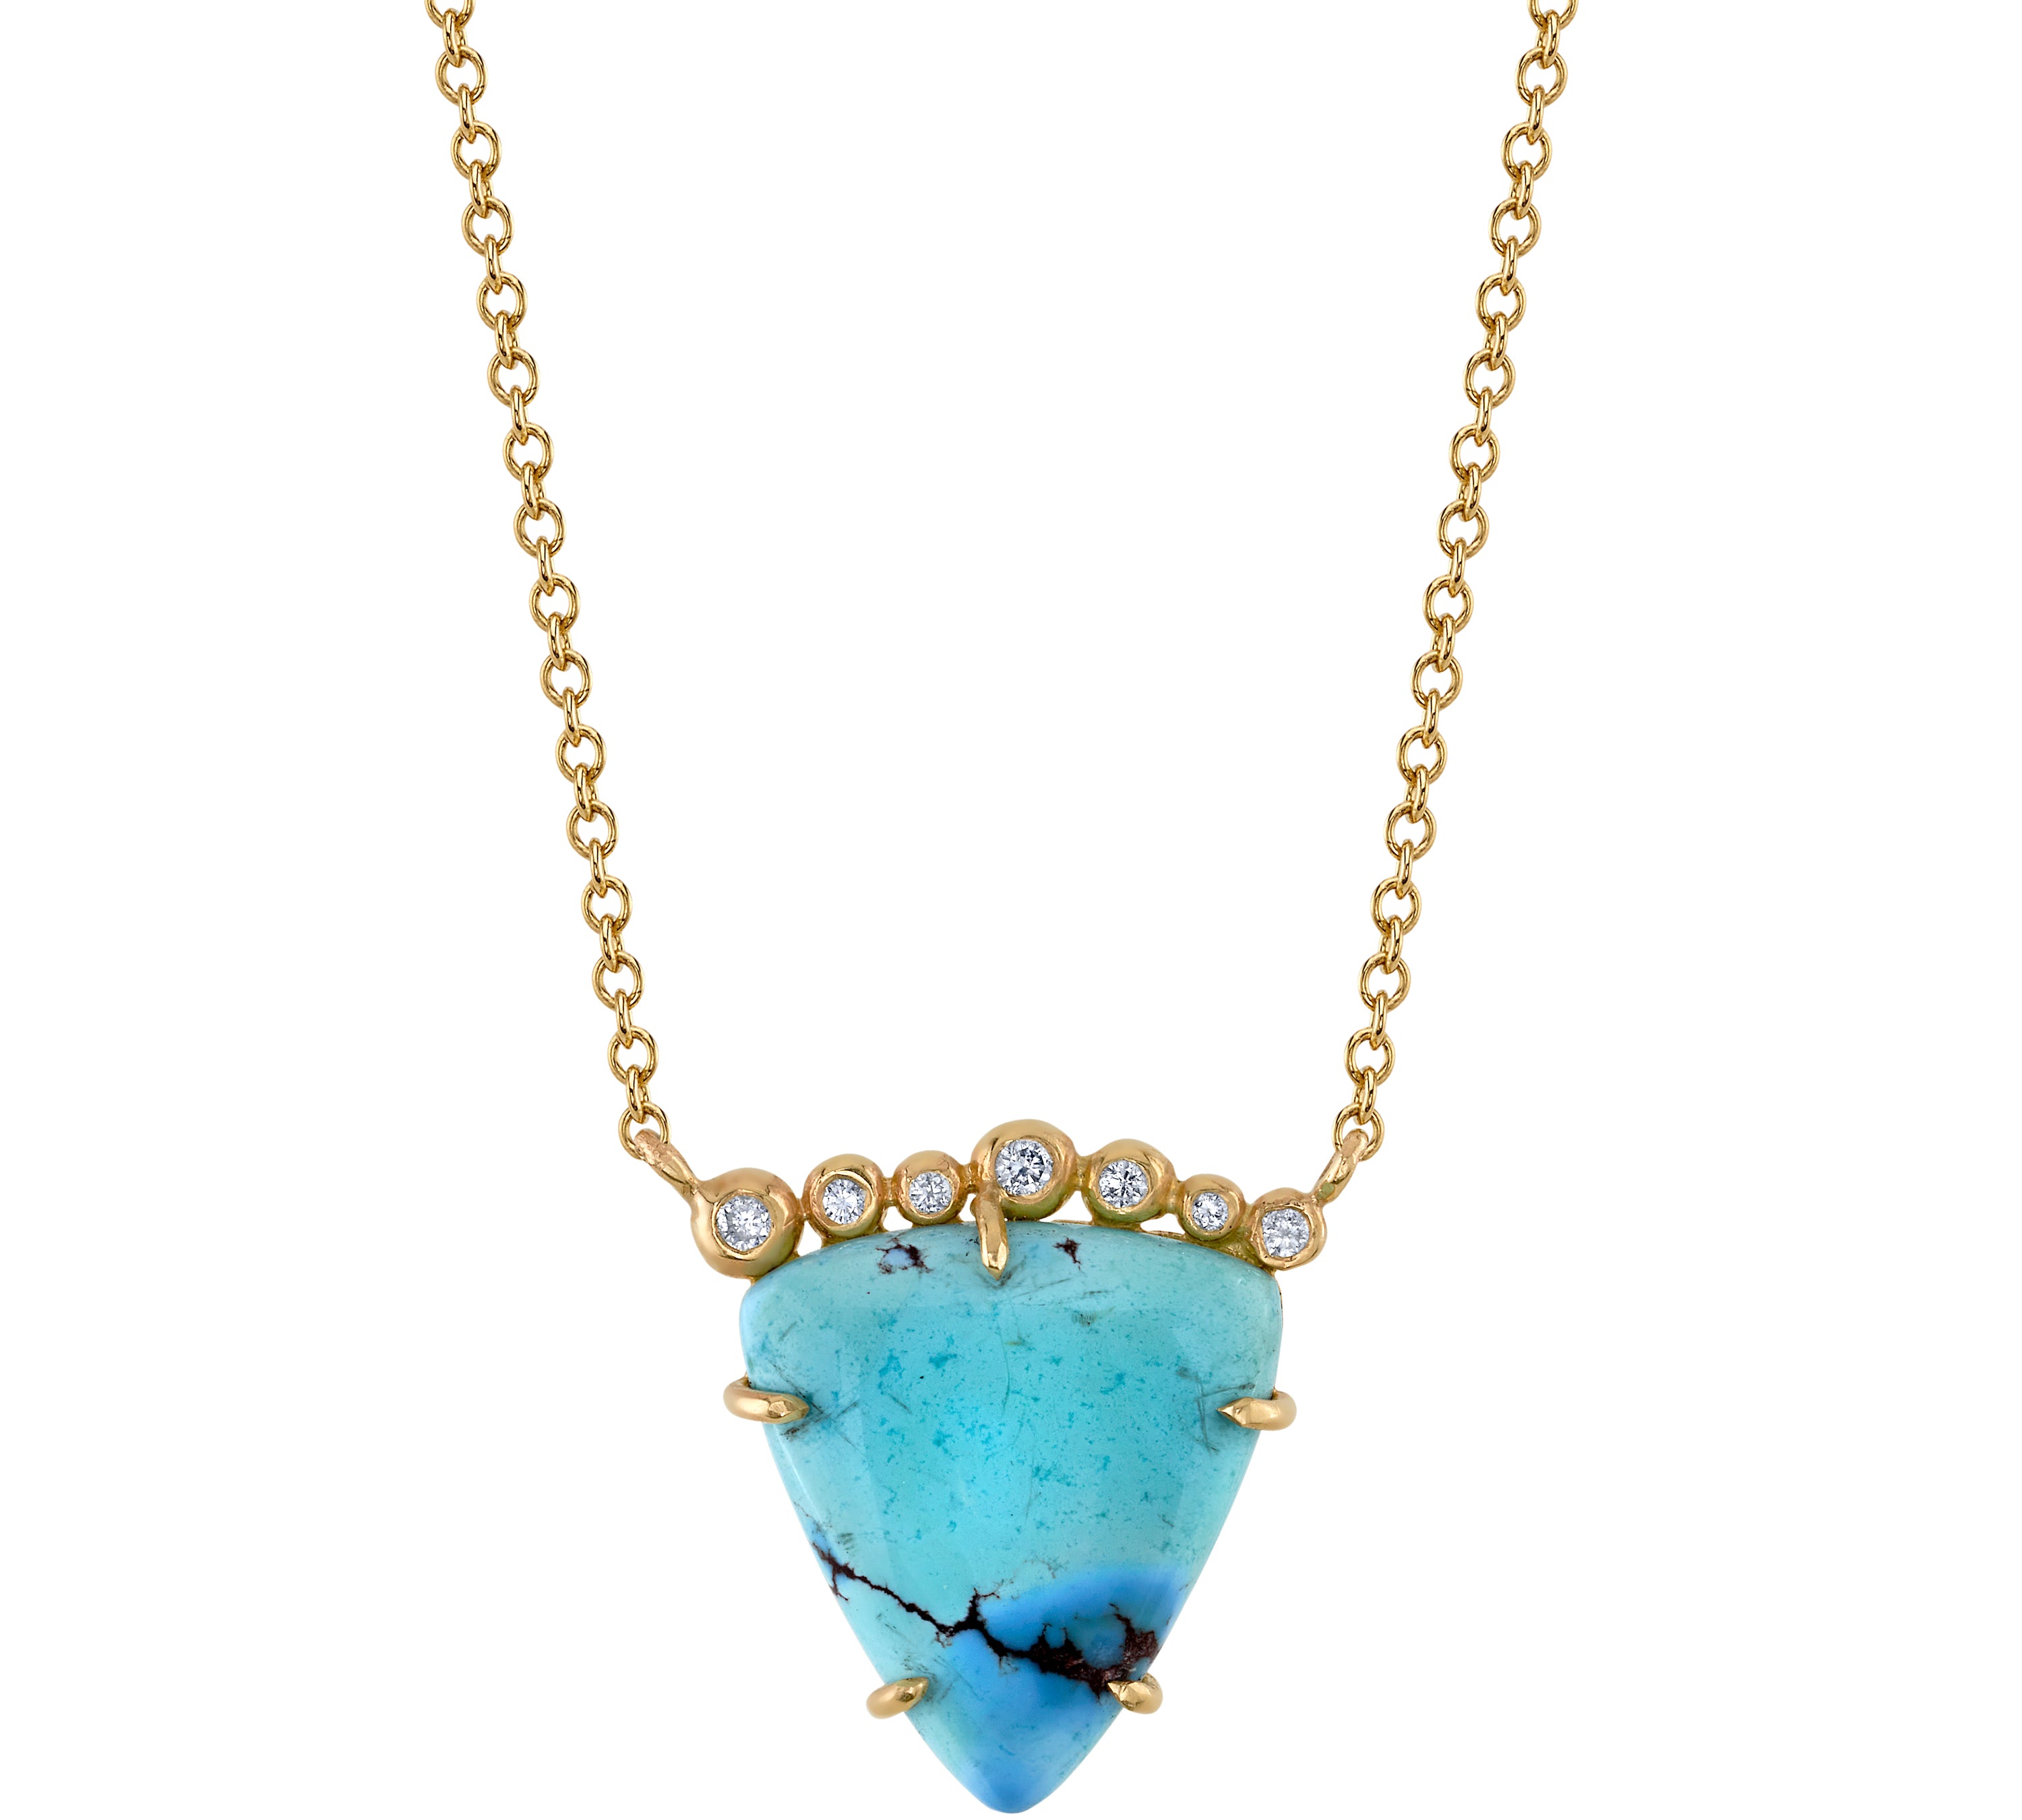 Triangle Turquoise Necklace Pendant Jill Hoffmeister   